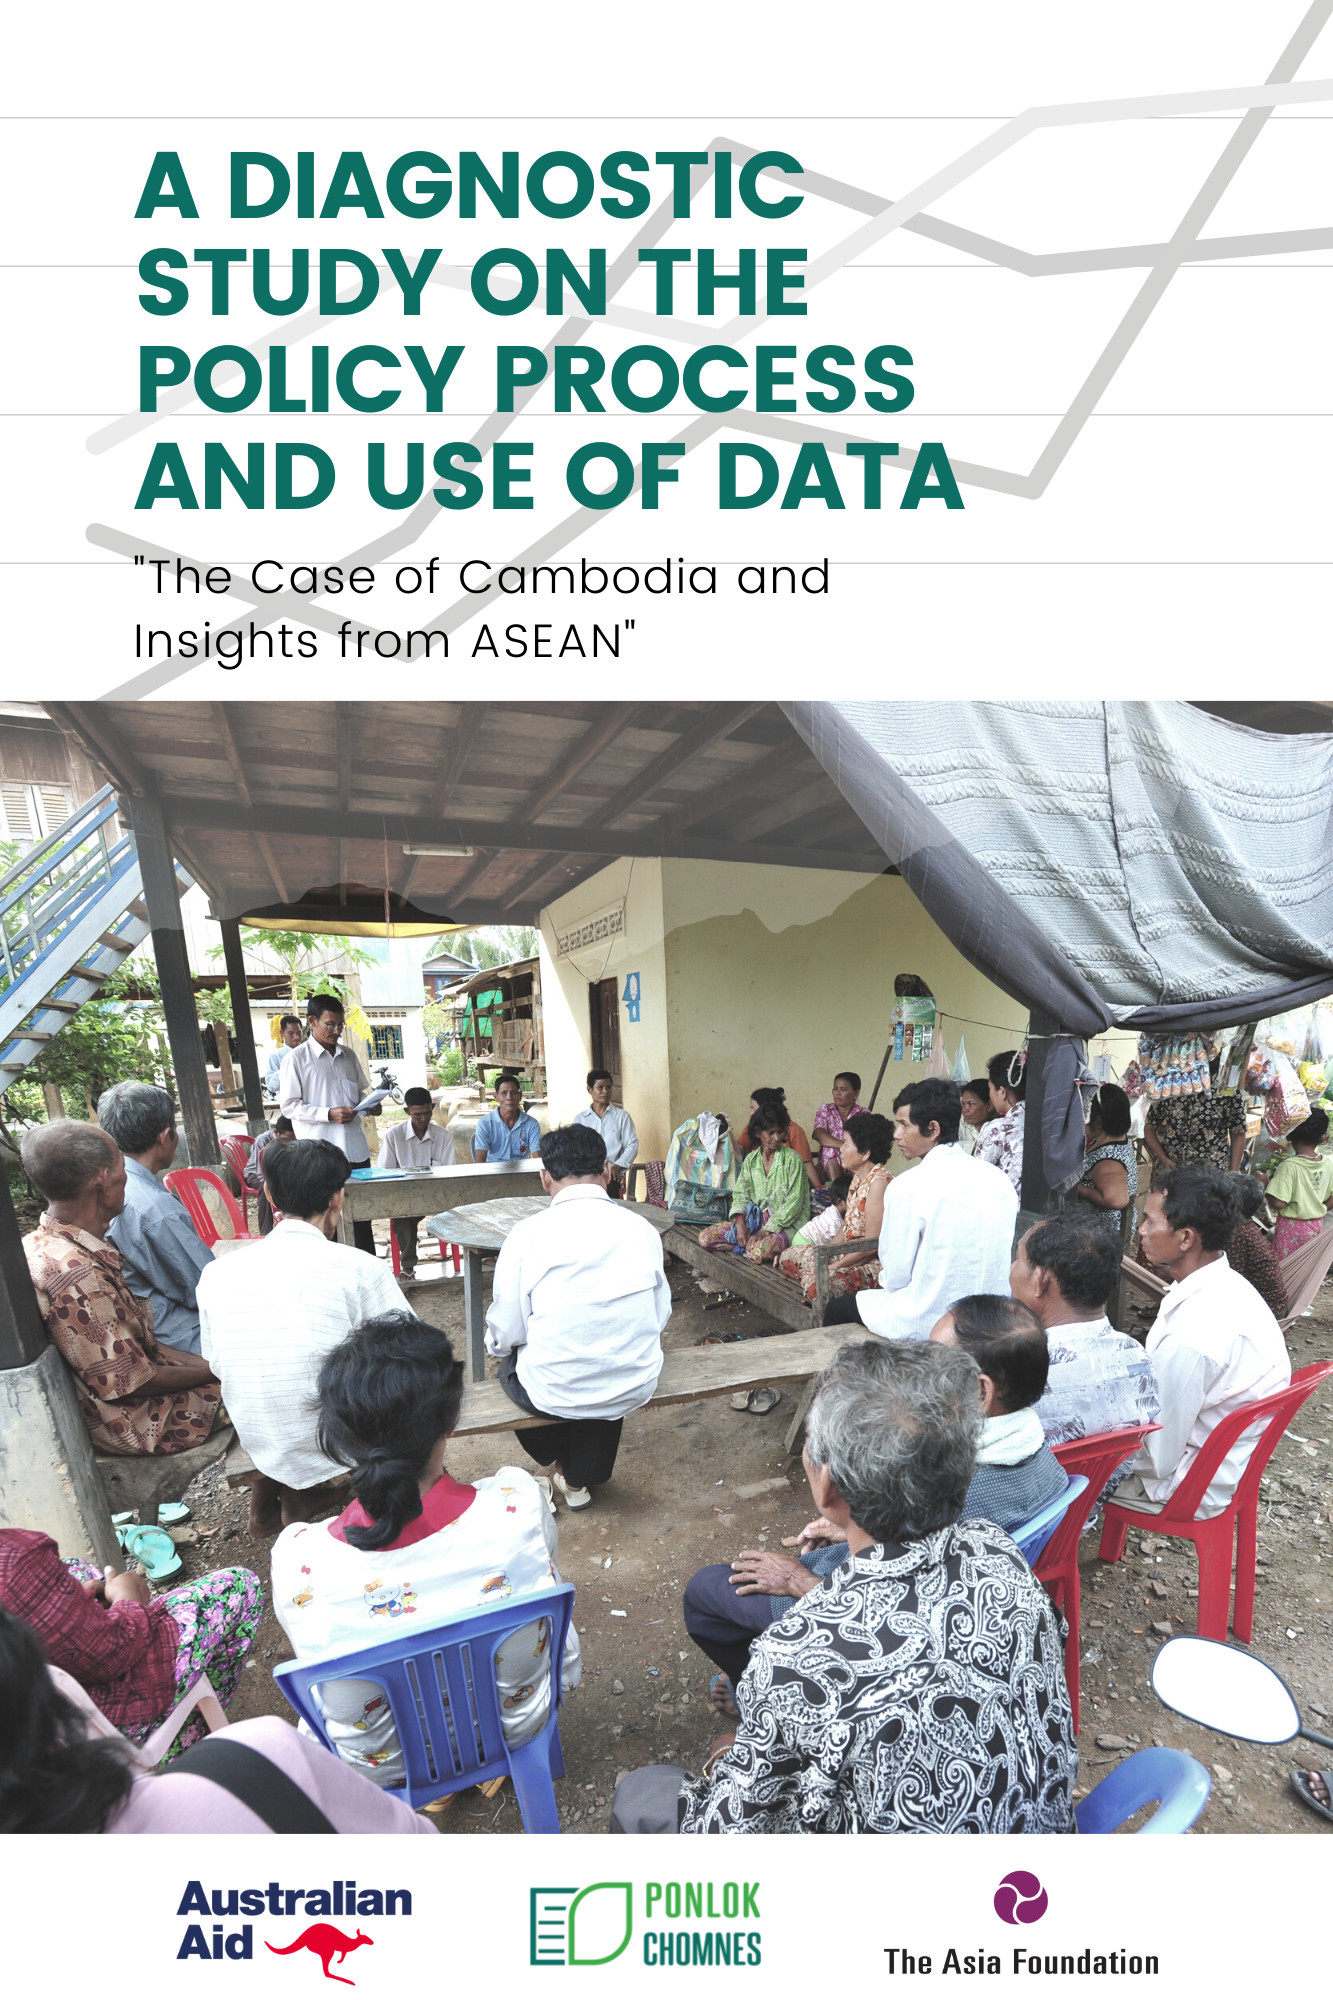 A diagnostic study on the policy process and use of data